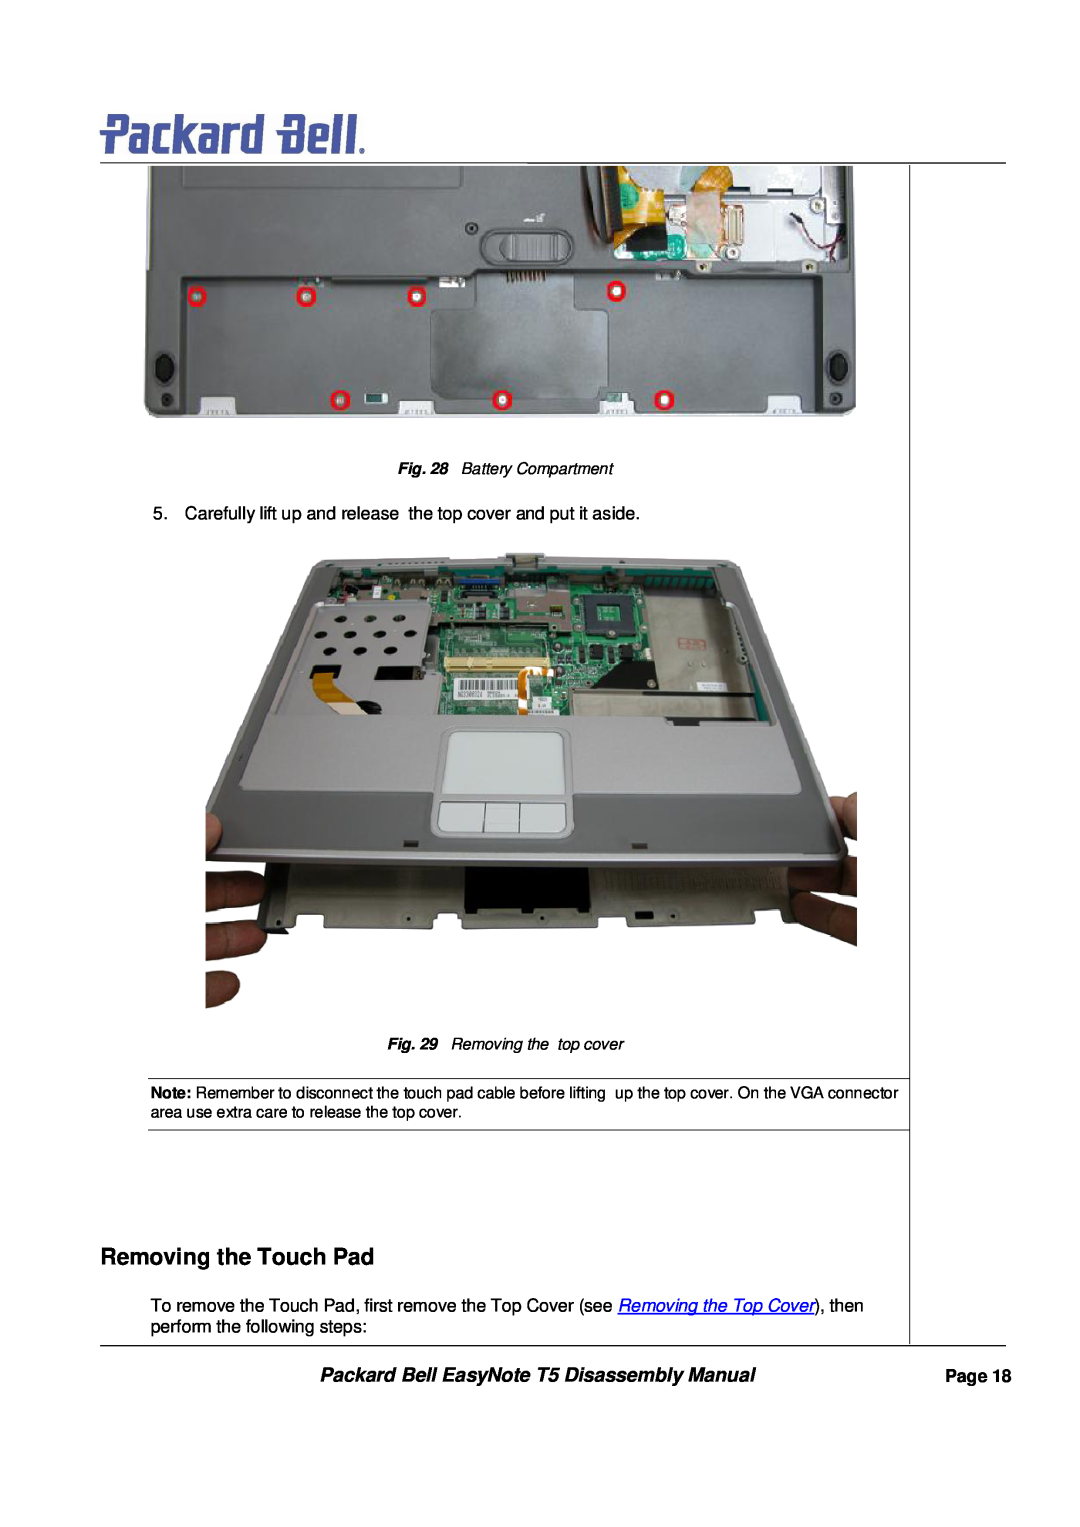 Packard Bell manual Removing the Touch Pad, Packard Bell EasyNote T5 Disassembly Manual, Battery Compartment, Page 